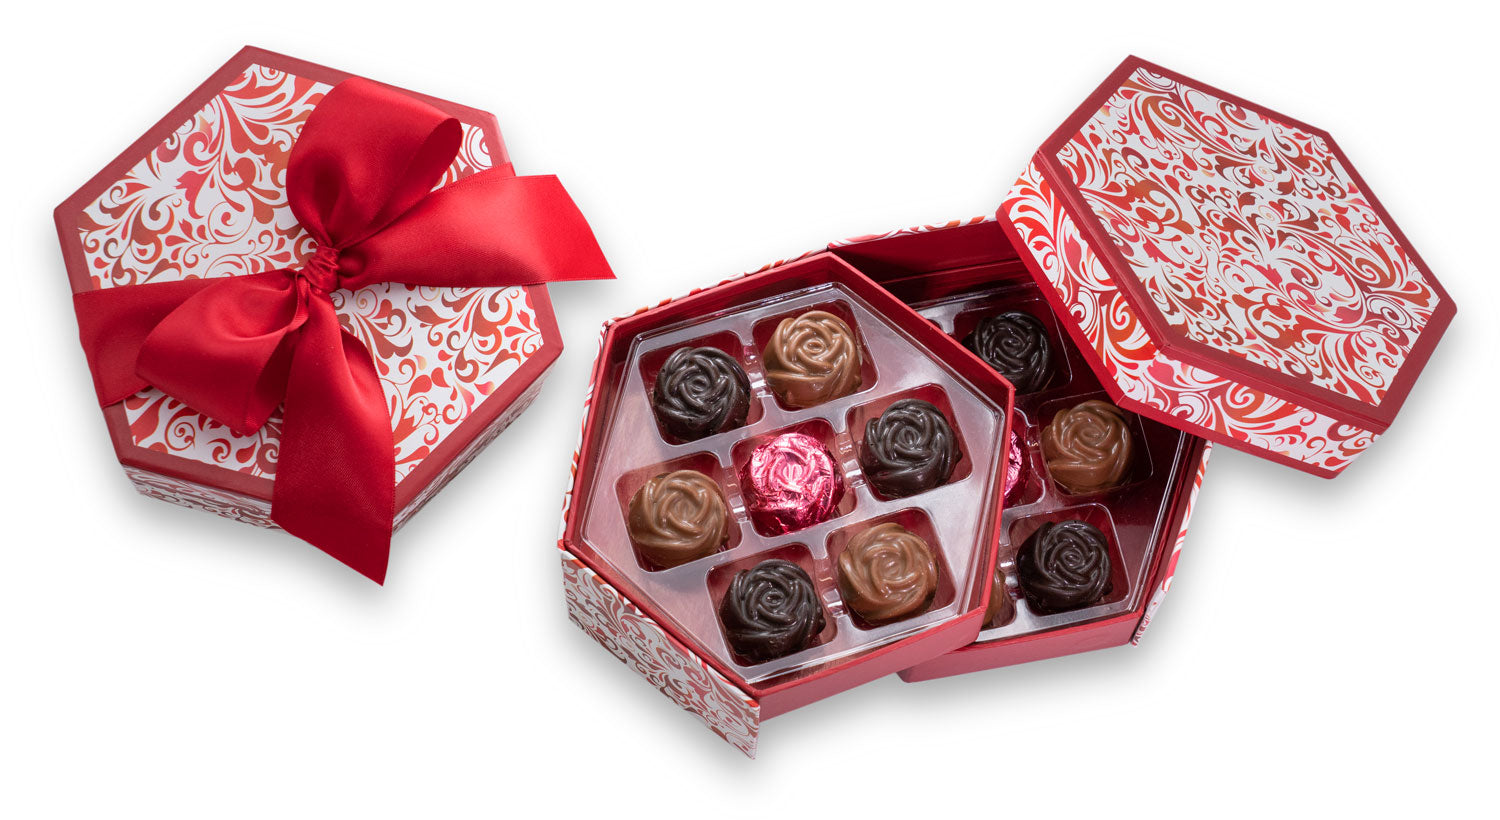 A keepsake gift box filled with rose-shaped  chocolate-covered sea salt caramels